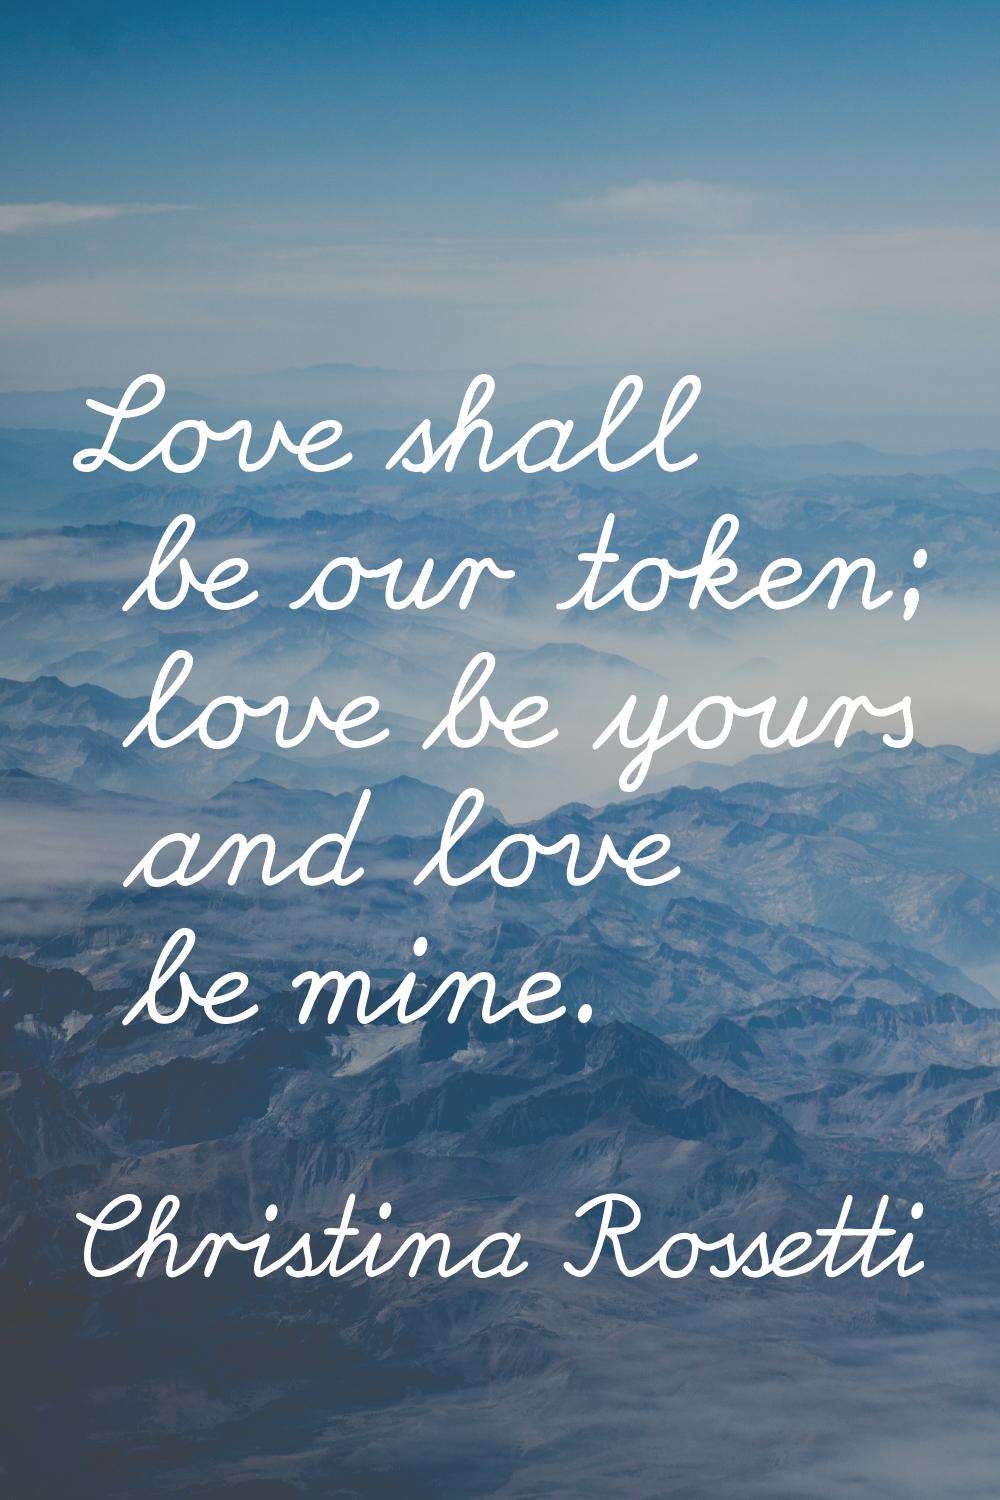 Love shall be our token; love be yours and love be mine.